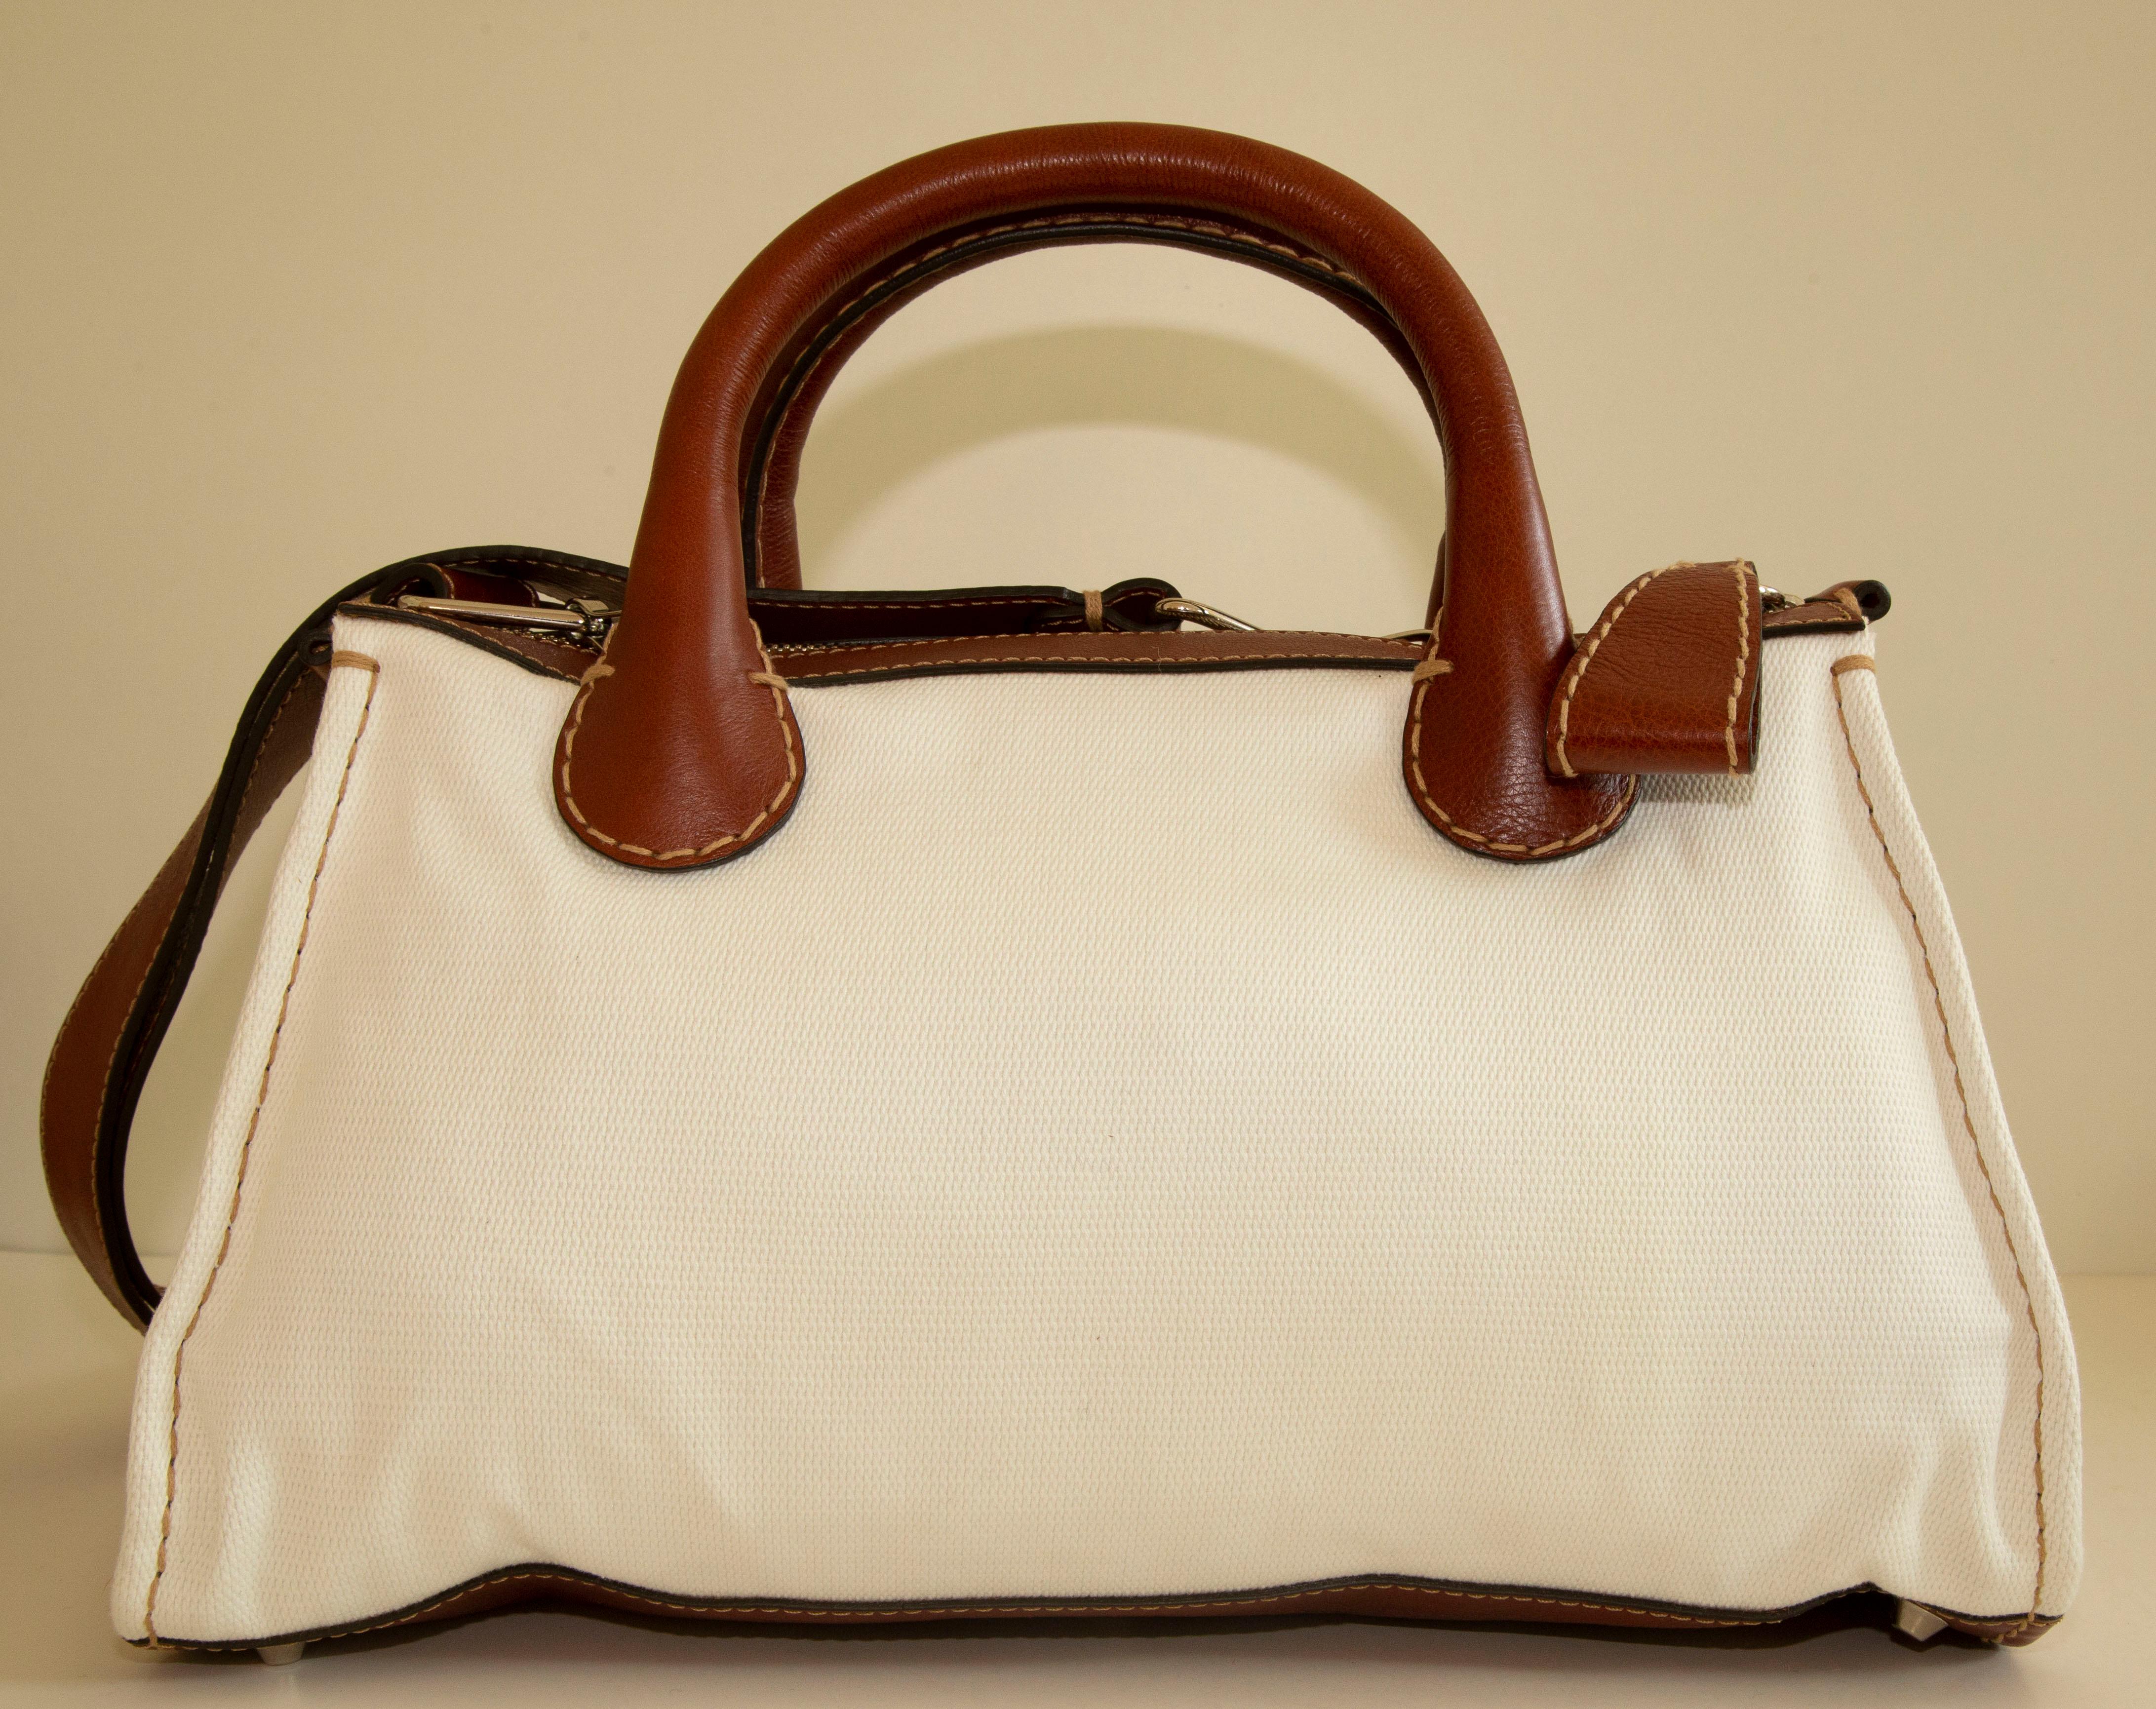 Chloe Edith medium tote made of white canvas with brown leather trim and silver tone hardware. The bag can be worn as a top handle bag or as a shoulder bag with the detachable shoulder strap (108 cm long). The interior is lined with brown fabric and